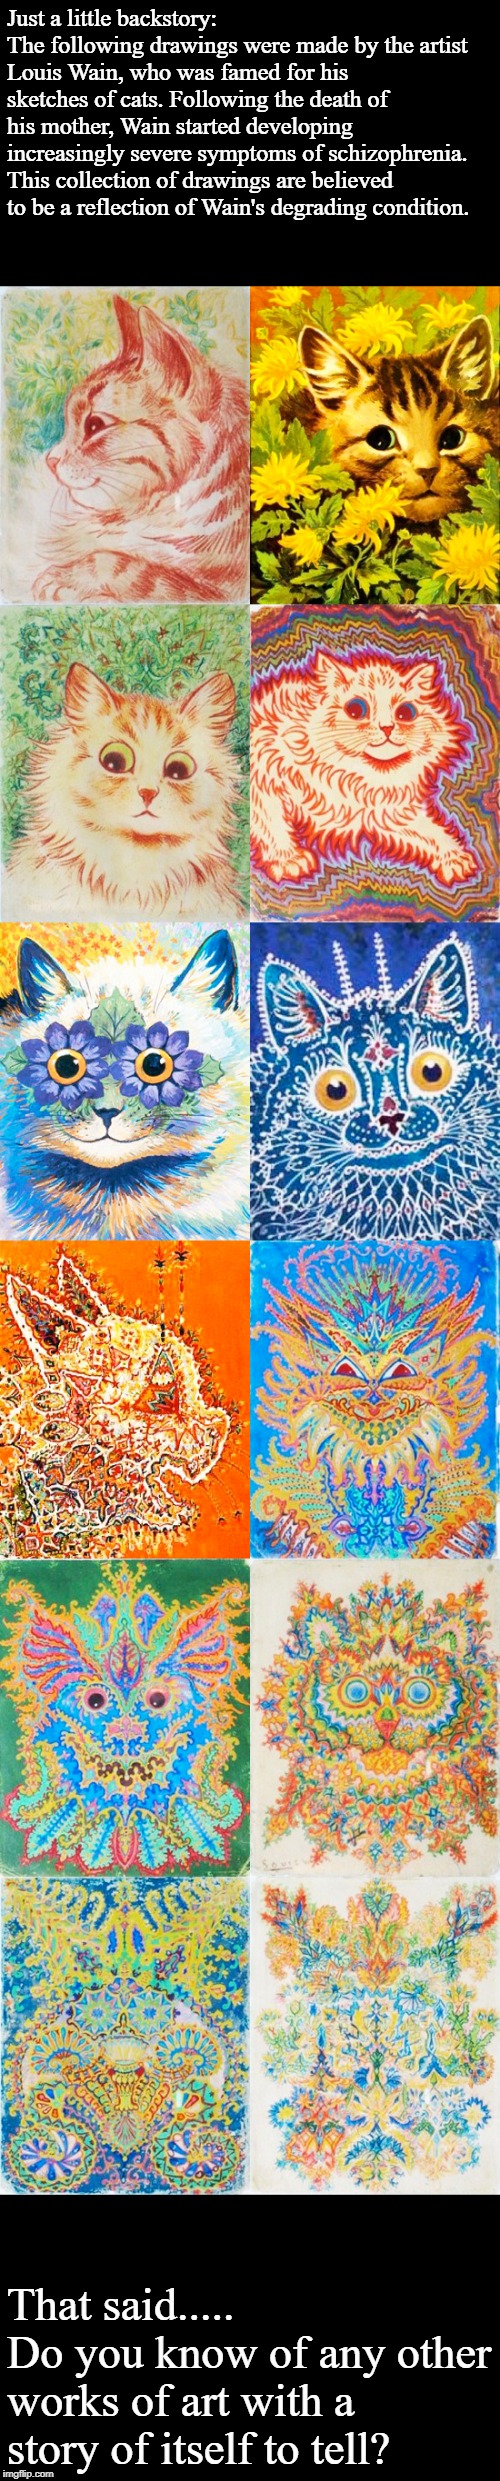 Just a little backstory:
The following drawings were made by the artist Louis Wain, who was famed for his sketches of cats. Following the death of his mother, Wain started developing increasingly severe symptoms of schizophrenia.
This collection of drawings are believed to be a reflection of Wain's degrading condition. That said.....
Do you know of any other works of art with a story of itself to tell? | image tagged in louis wain,schizophrenia,cats,drawing | made w/ Imgflip meme maker